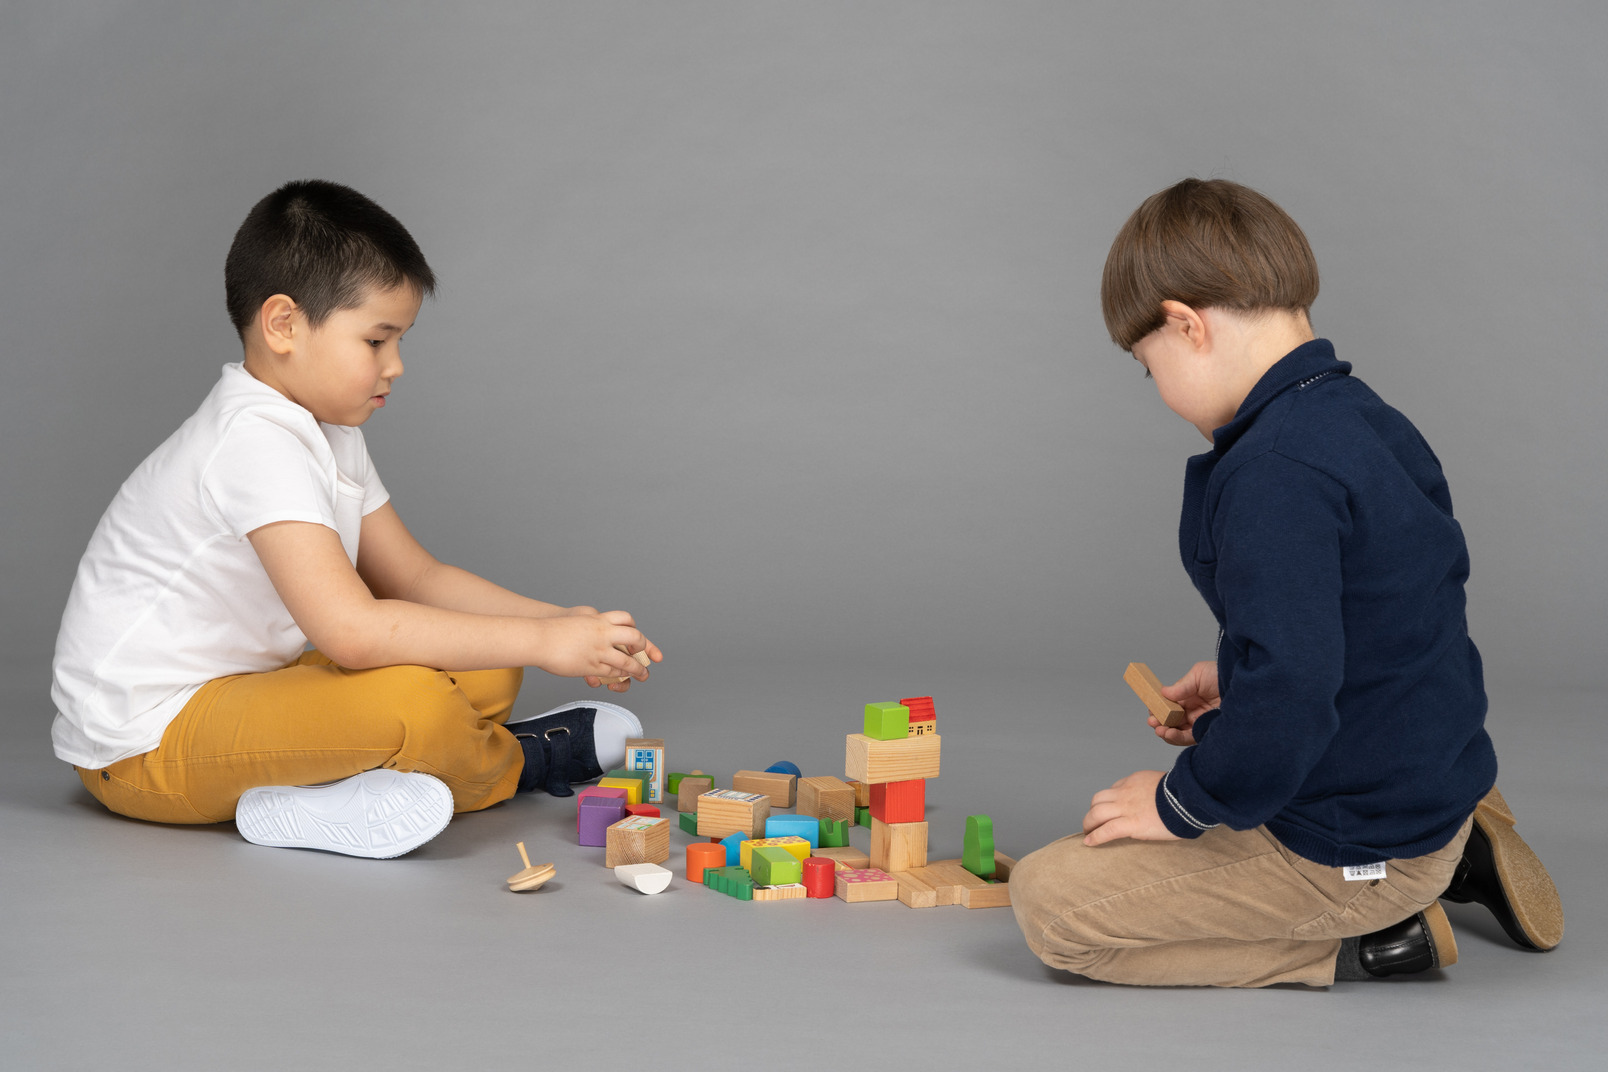 Kids playing with toy blocks